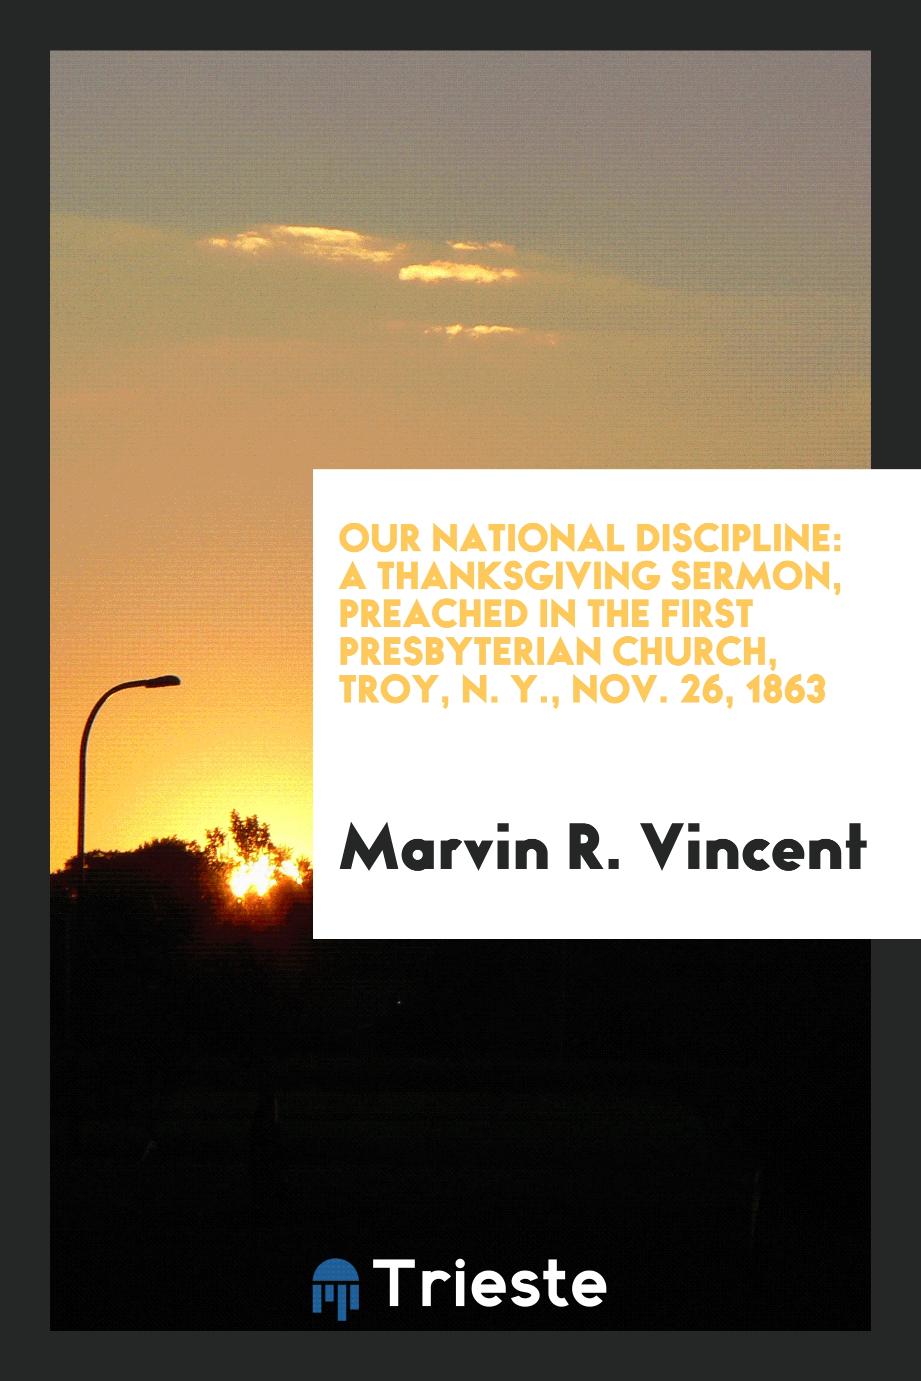 Our National Discipline: A Thanksgiving Sermon, Preached in the First Presbyterian Church, Troy, N. Y., Nov. 26, 1863